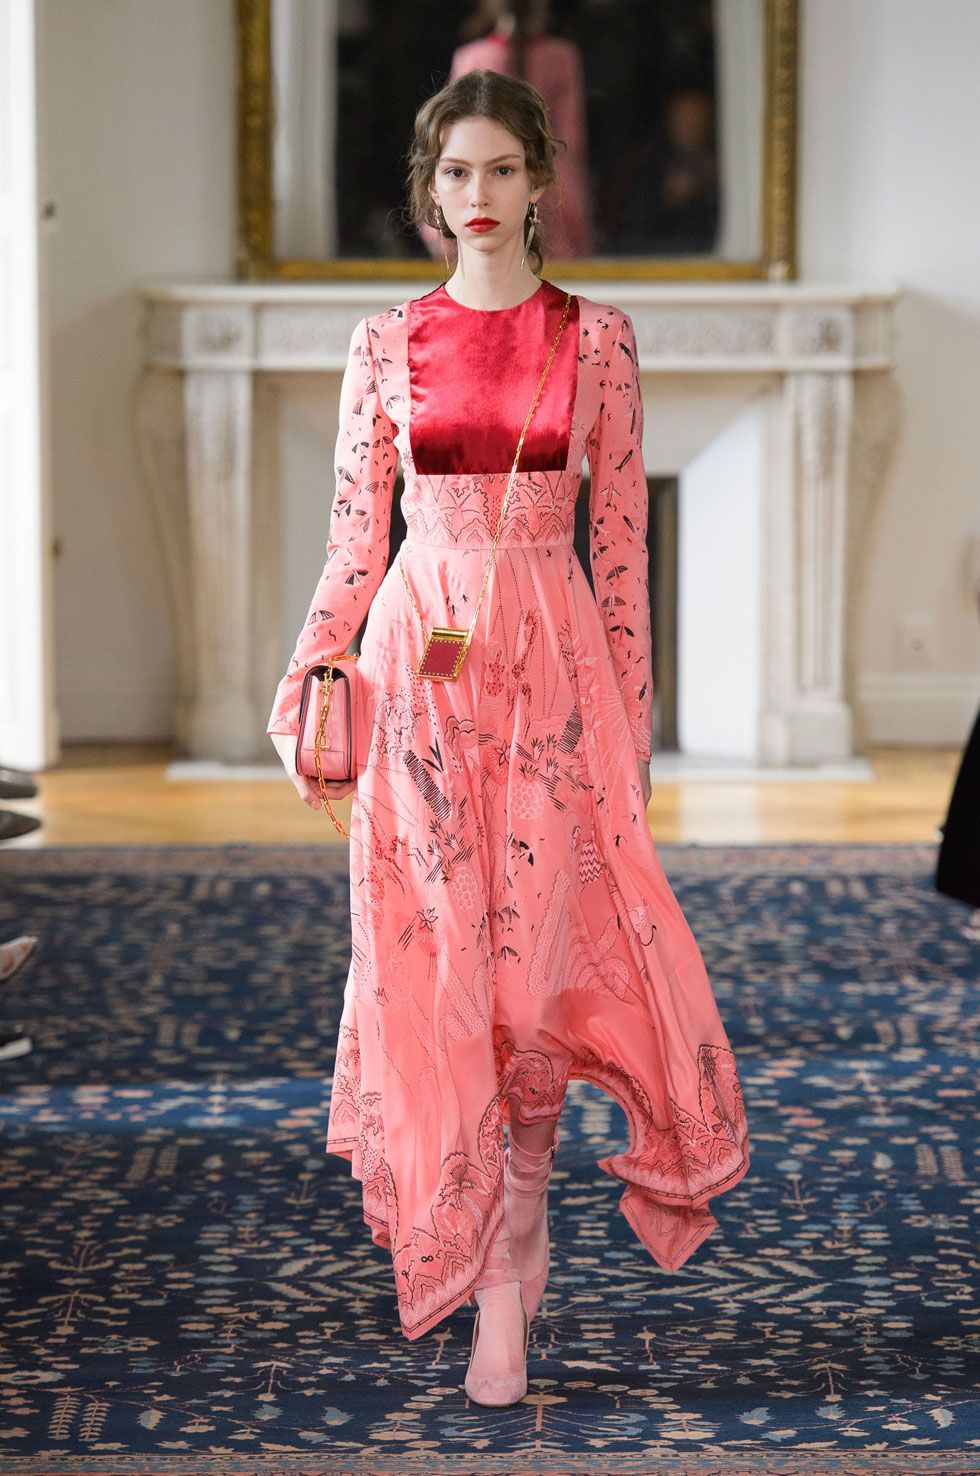 64 Looks From the Valentino Spring Show - Valentino Runway Show at Fashion Week